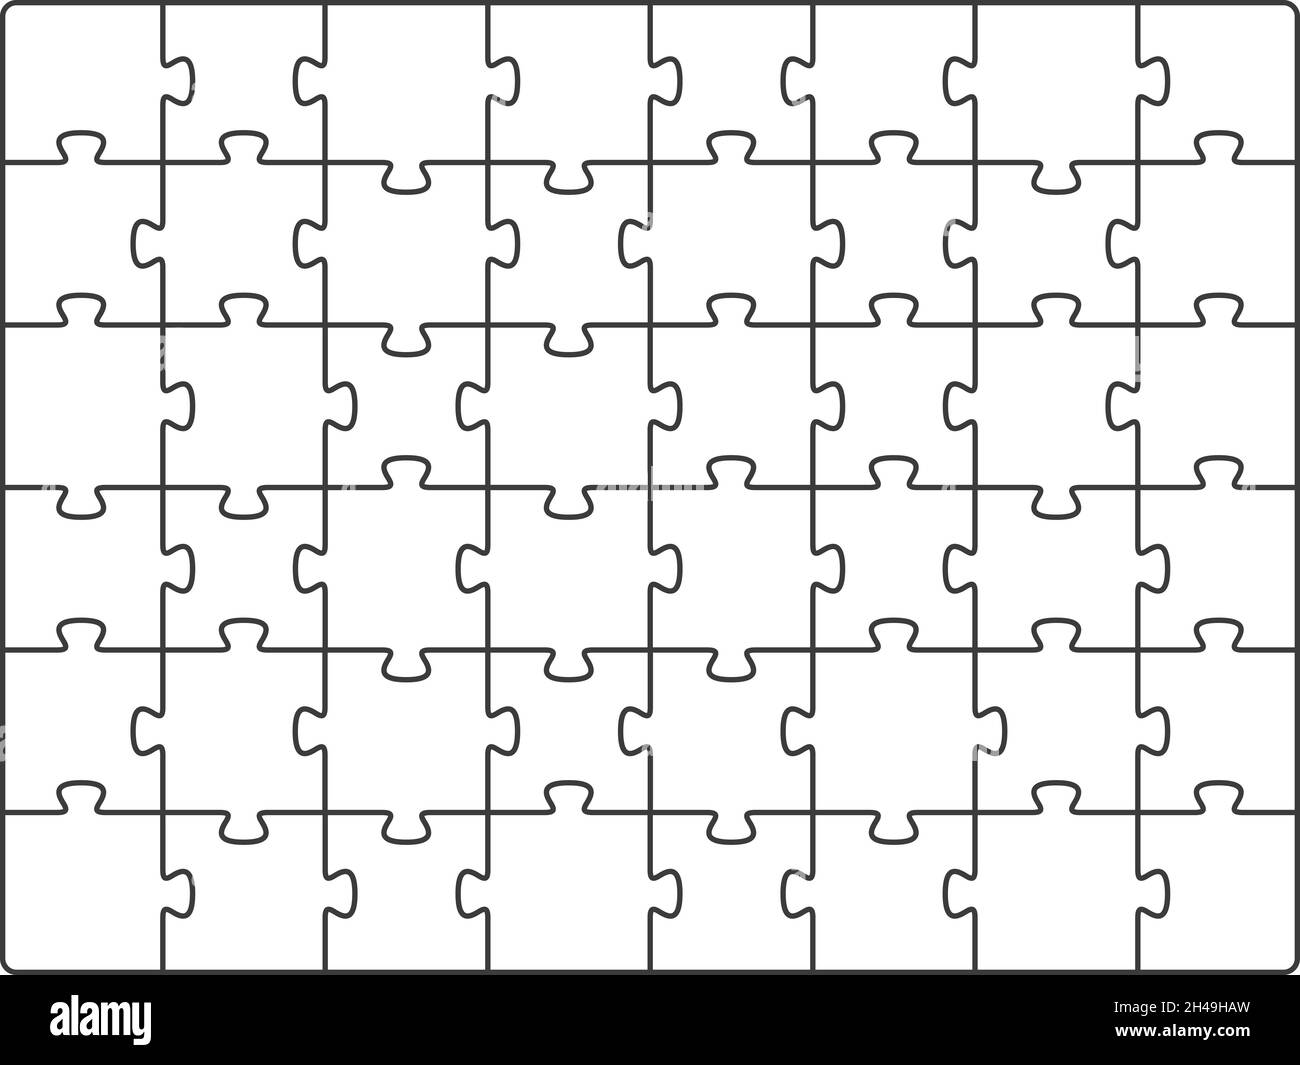 Jigsaw puzzle grid template, blank white pieces of puzzle pattern